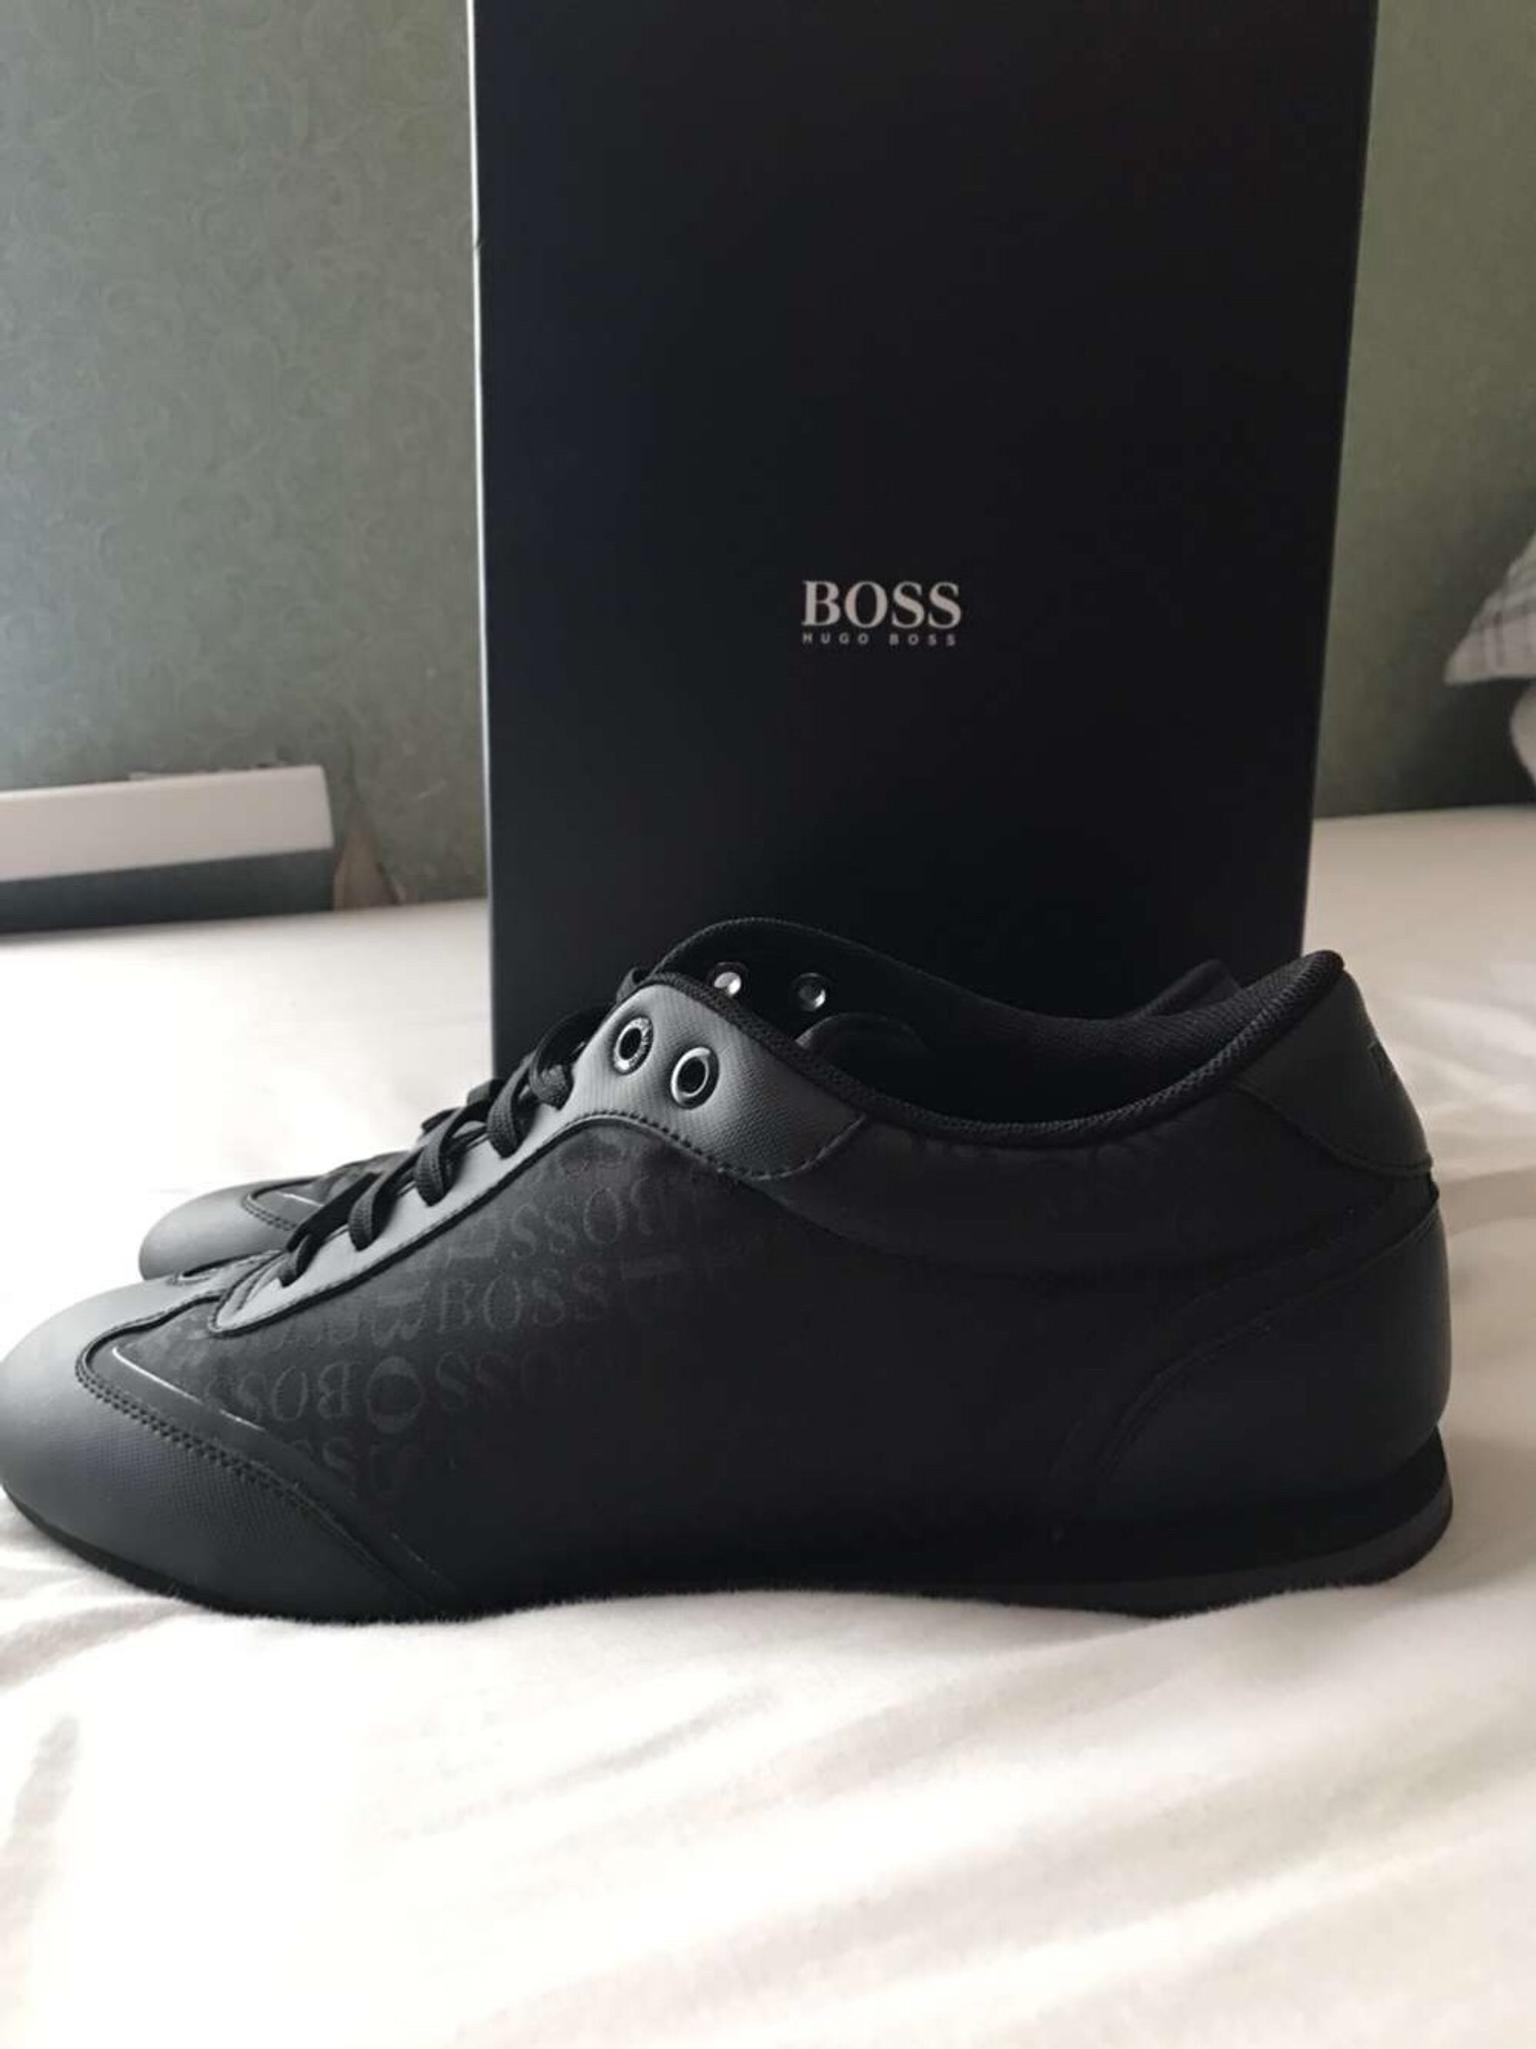 boss trainers size 8